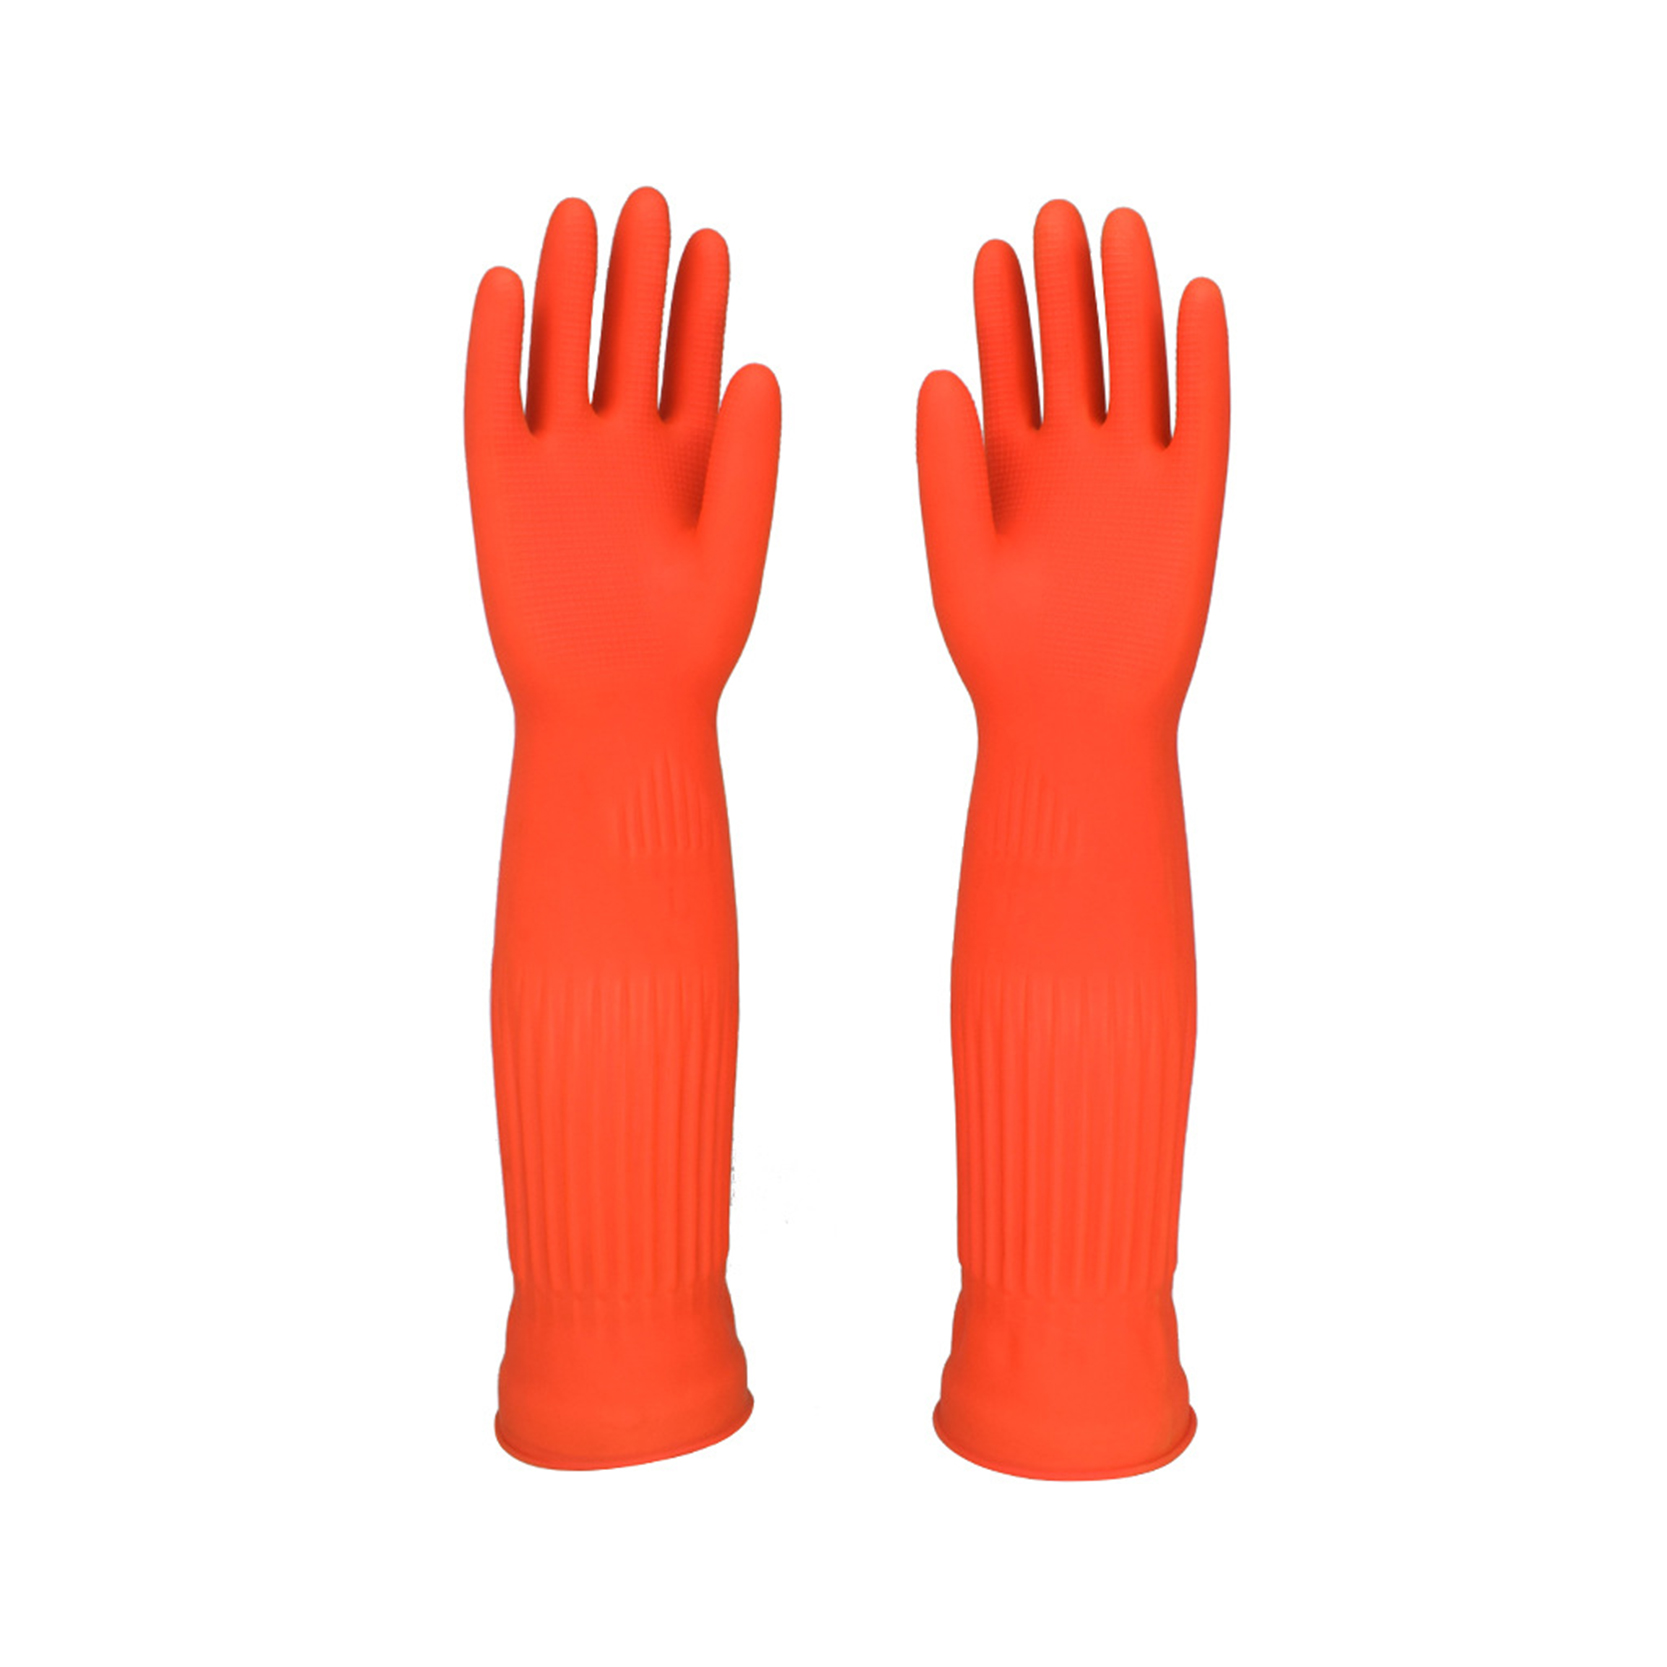 Kitchenware Good Quality Rubber Gloves 45cm Long Waterproof Rubber Gloves